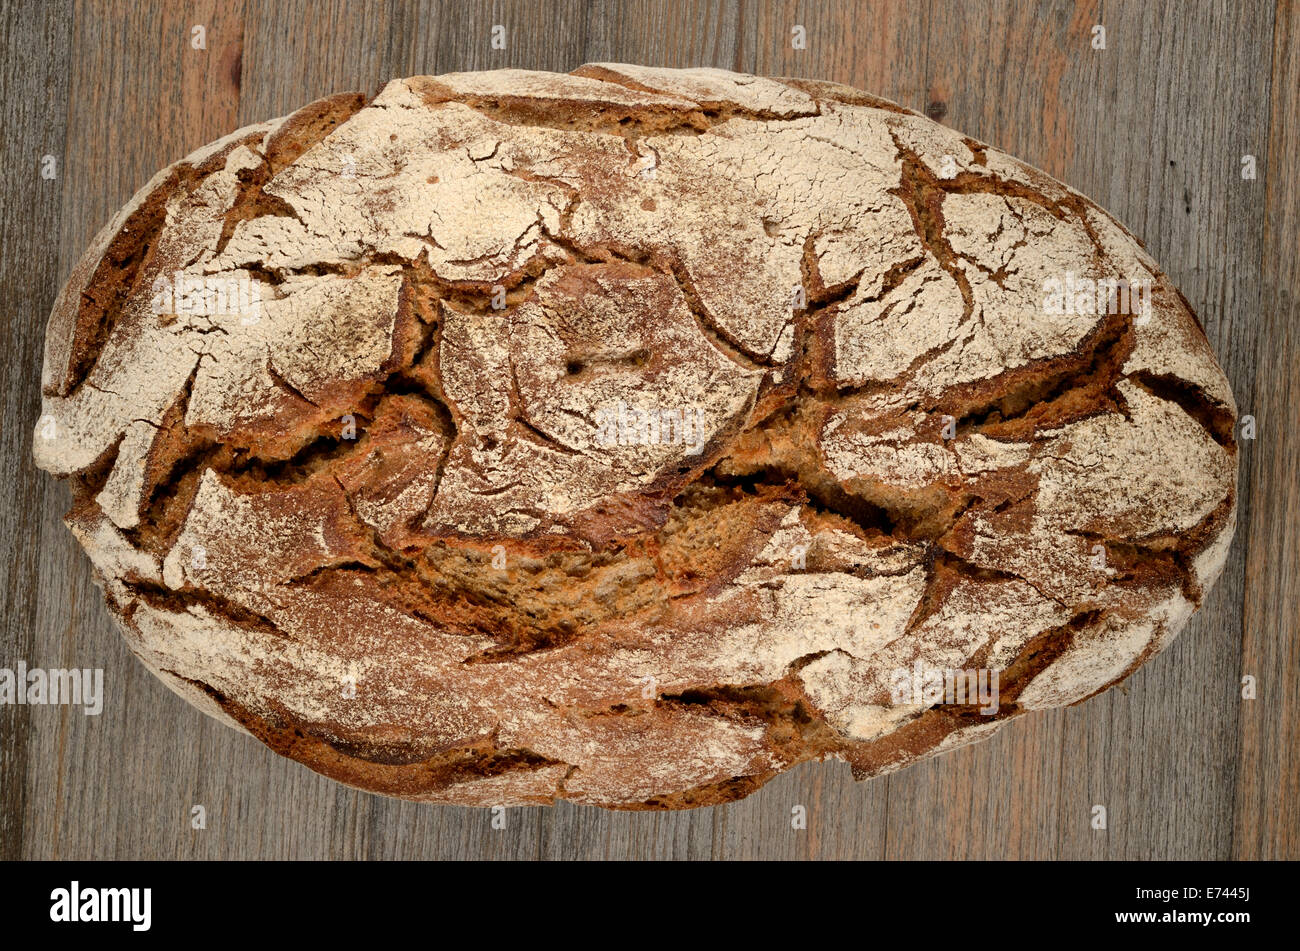 a loaf of rye bread on wood on wood Stock Photo